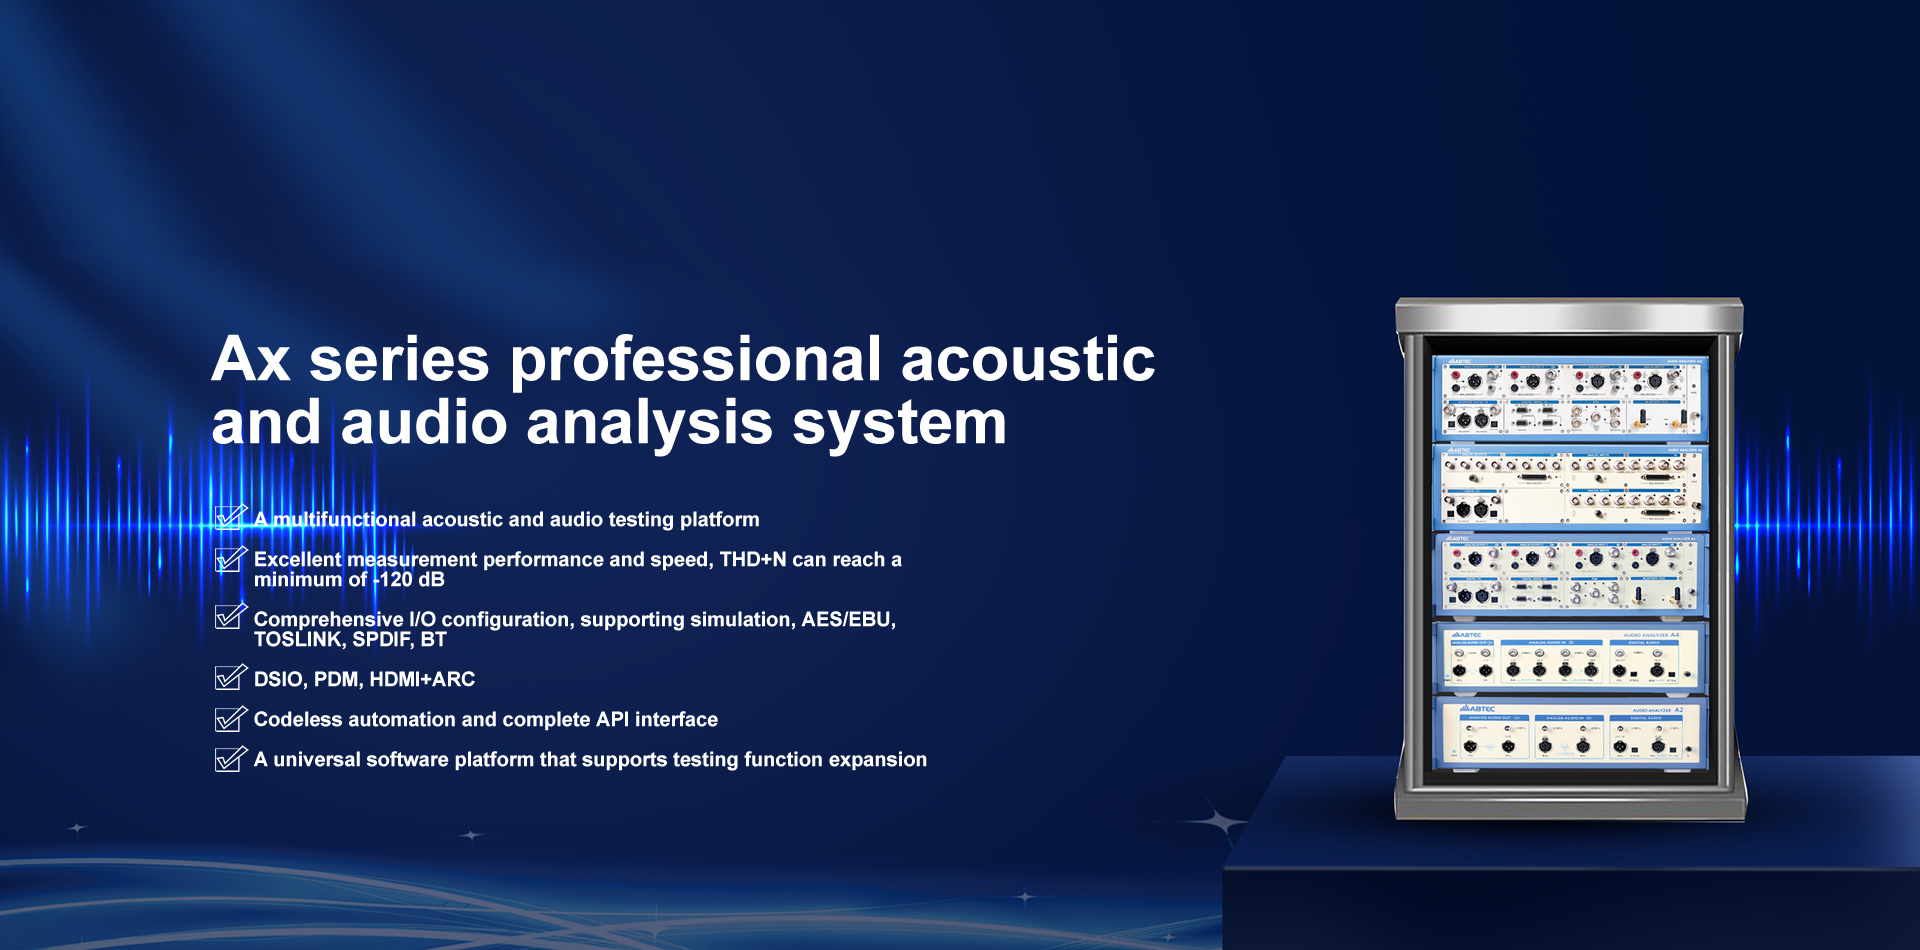 Ax series professional acoustic and audio analysis system